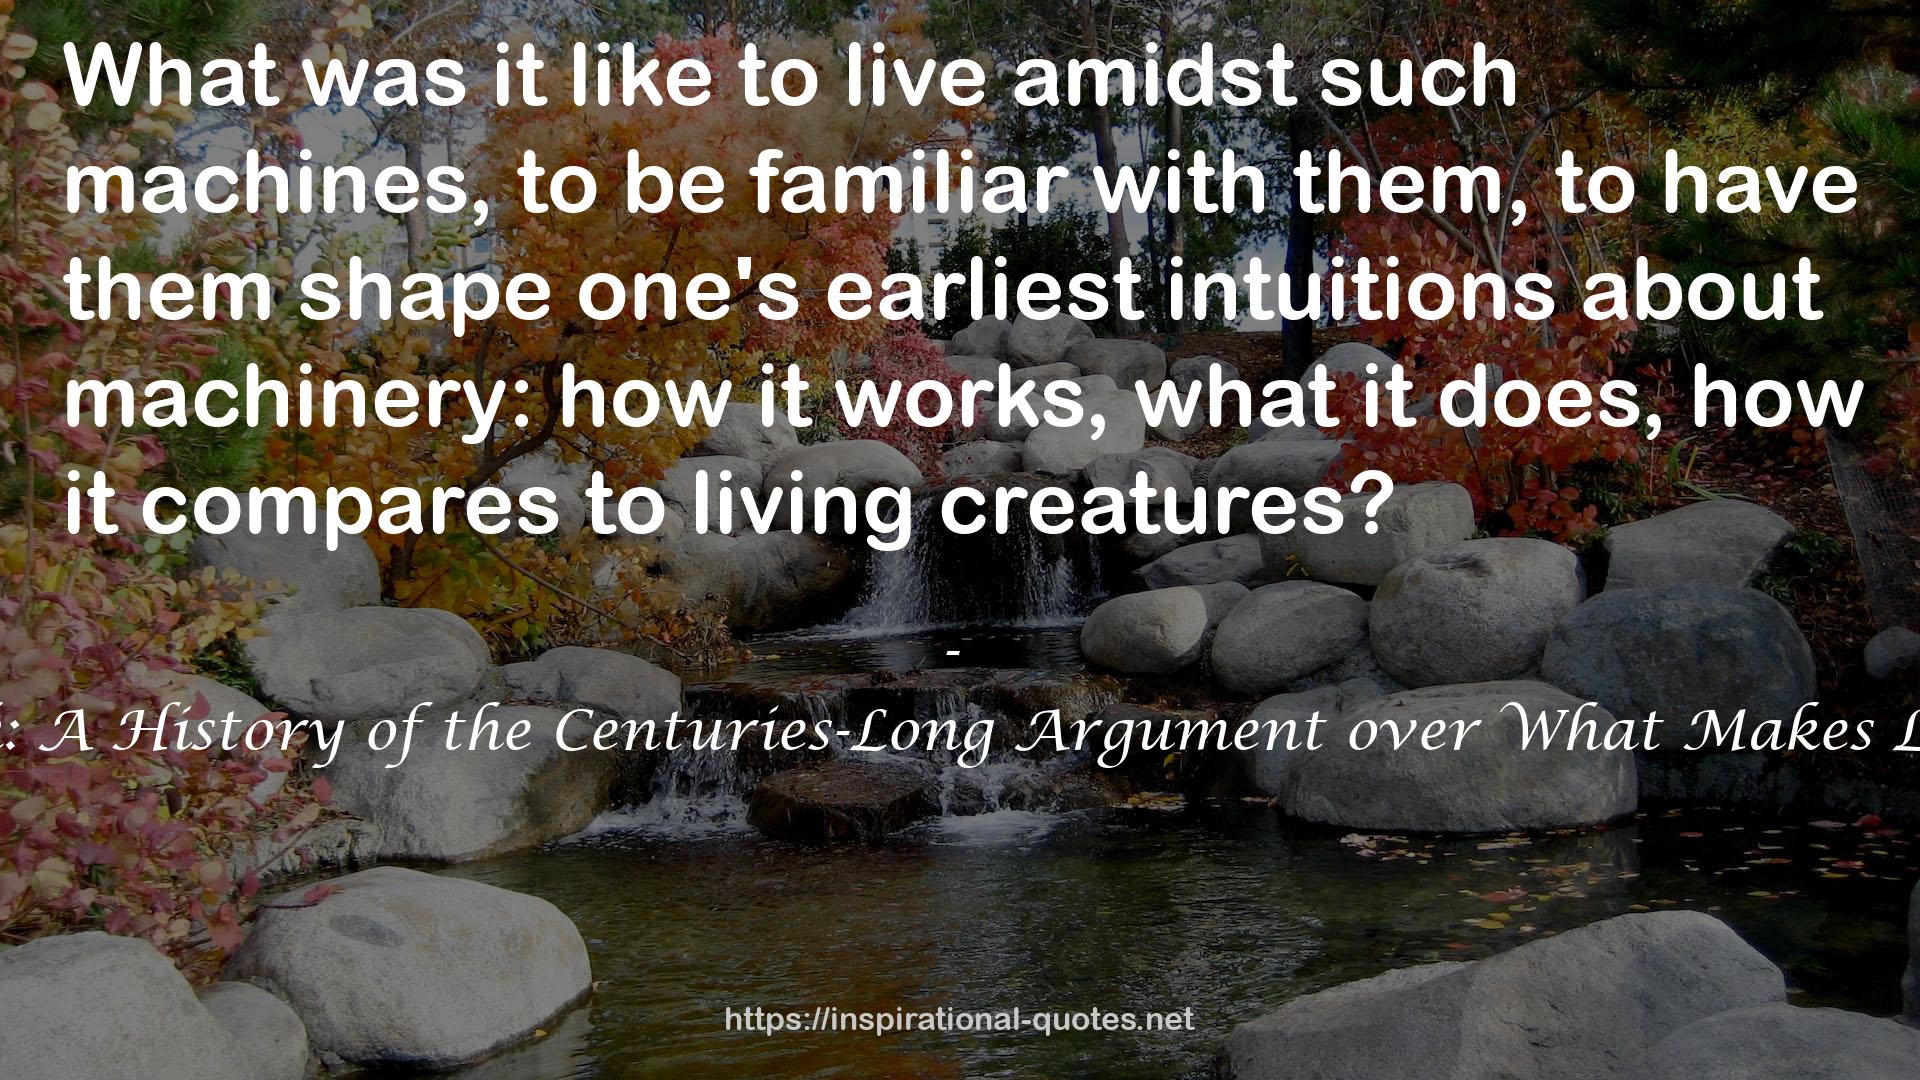 The Restless Clock: A History of the Centuries-Long Argument over What Makes Living Things Tick QUOTES